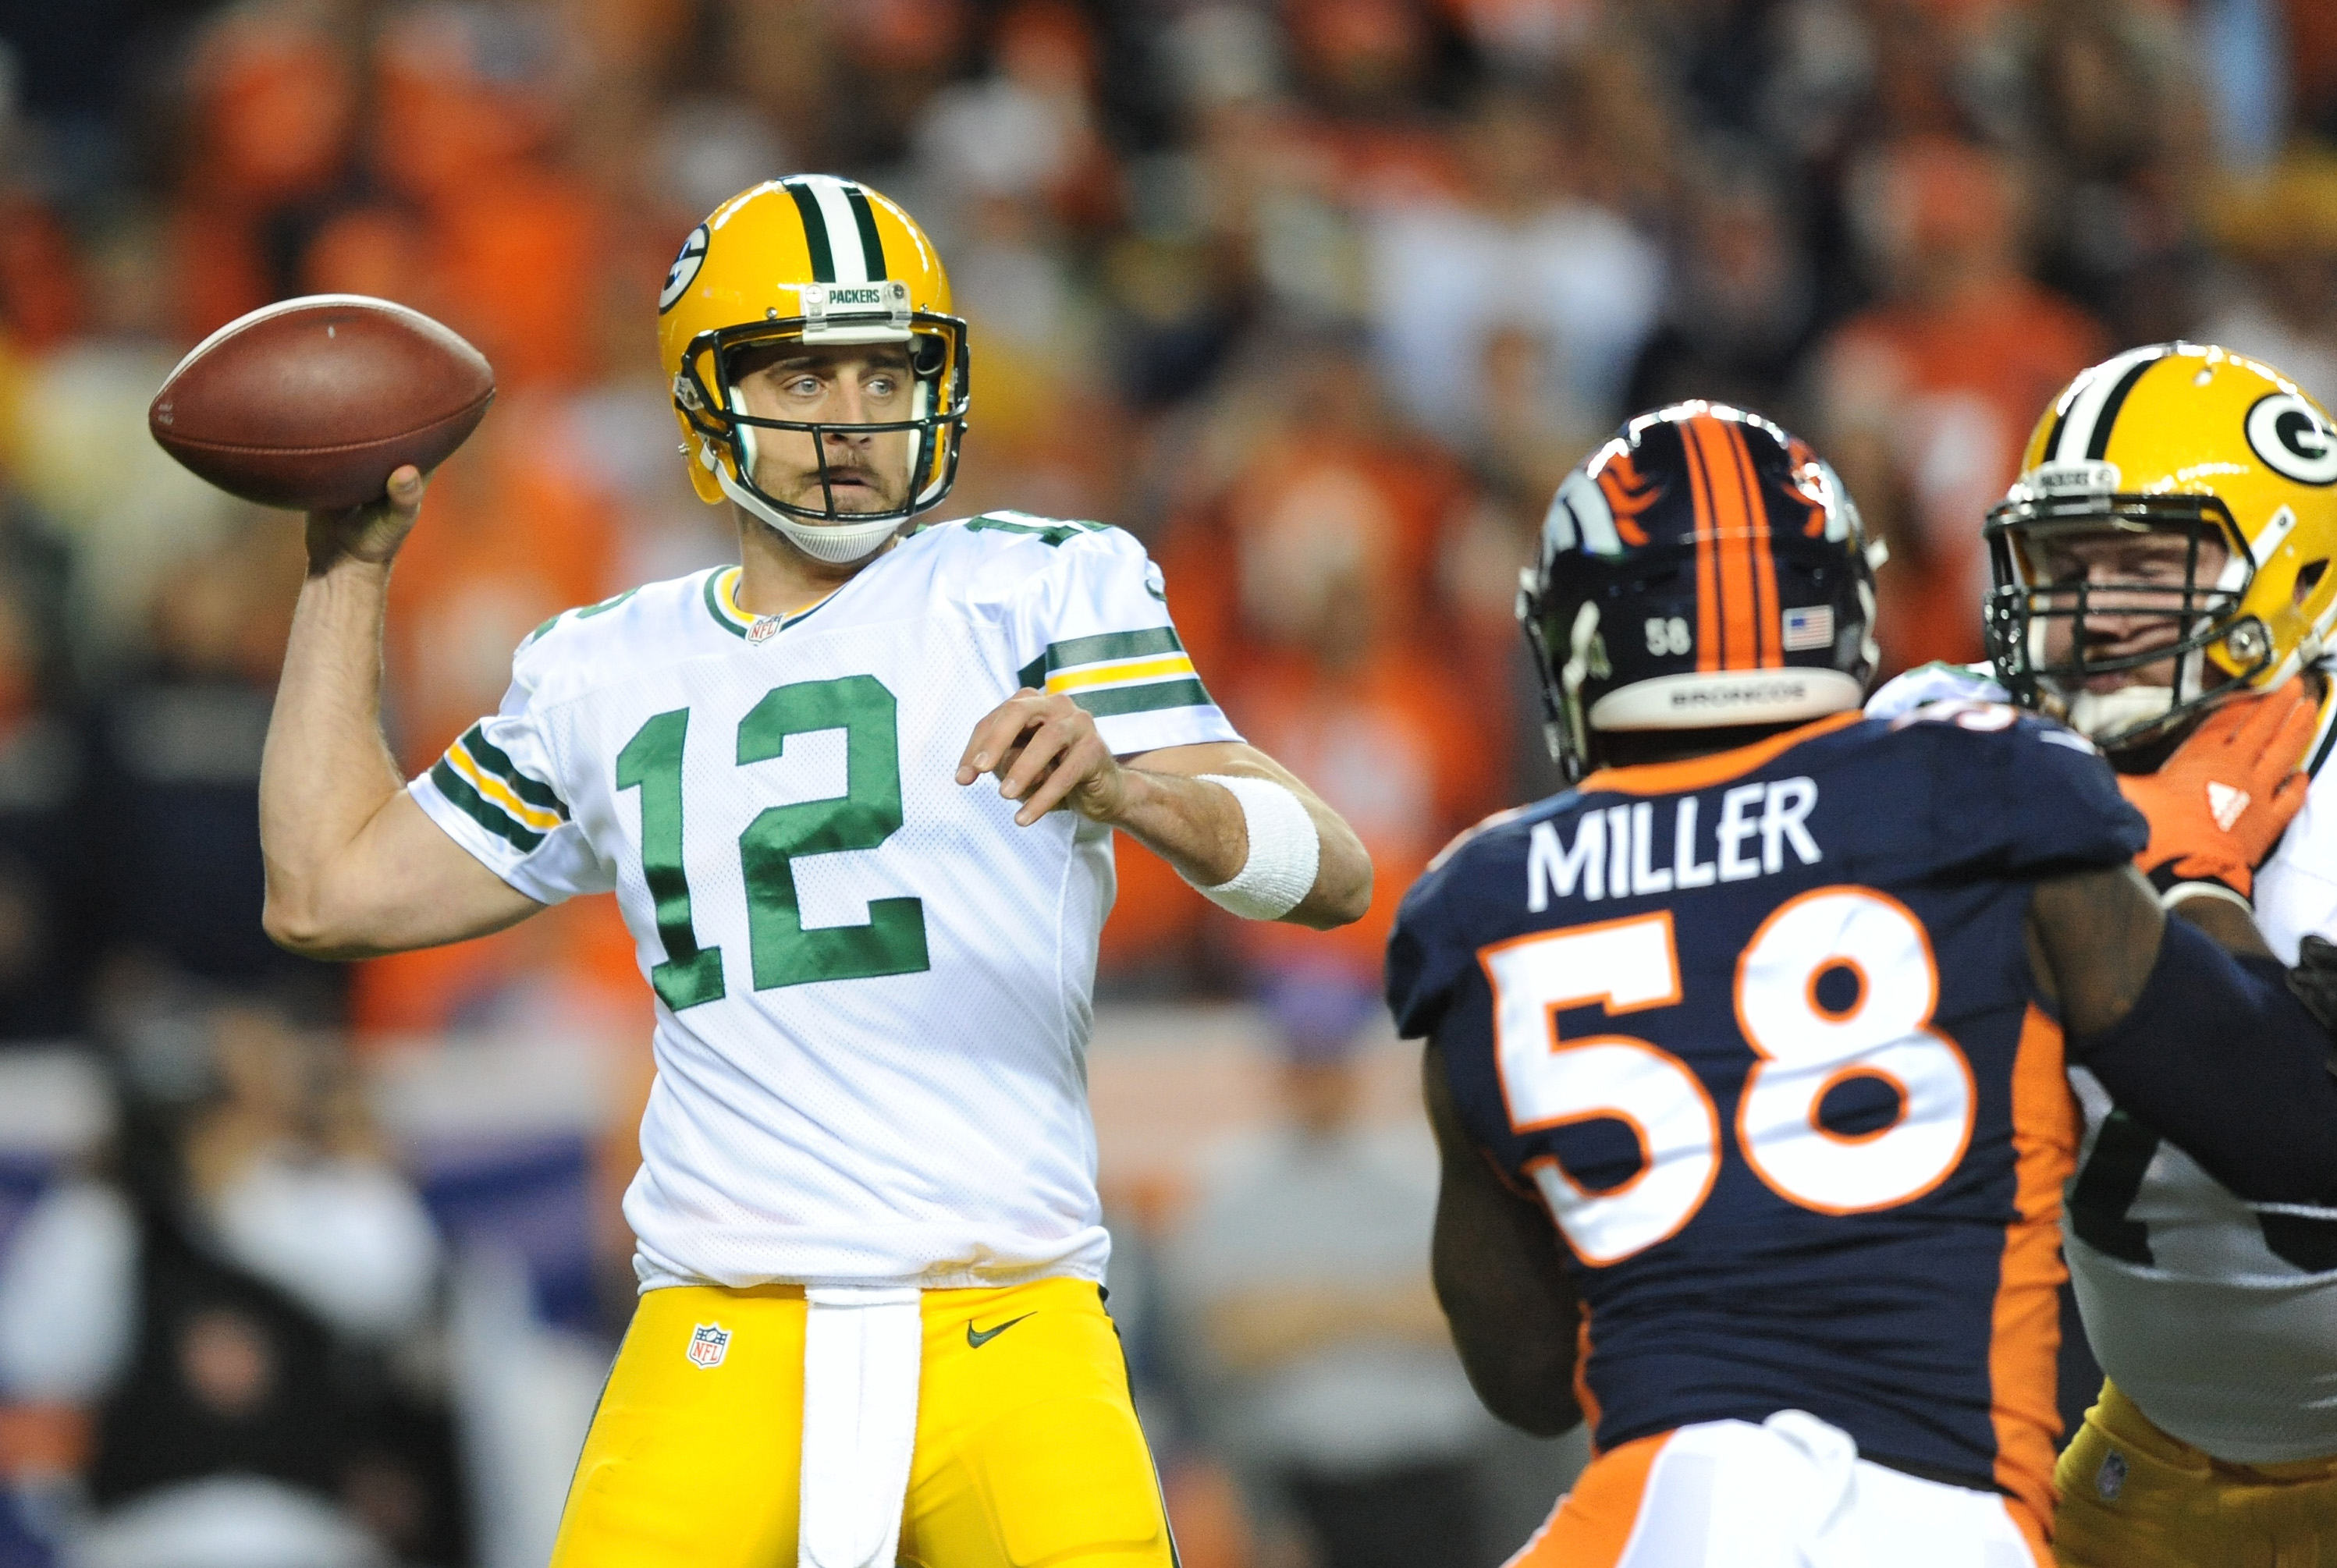 Quarterback Aaron Rodgers #12 of the Green Bay Packers looks to pass against the Von Miller #58 of the Denver Broncos in the first half of the game at Sports Authority Field at Mile High on November 1, 2015 in Denver.